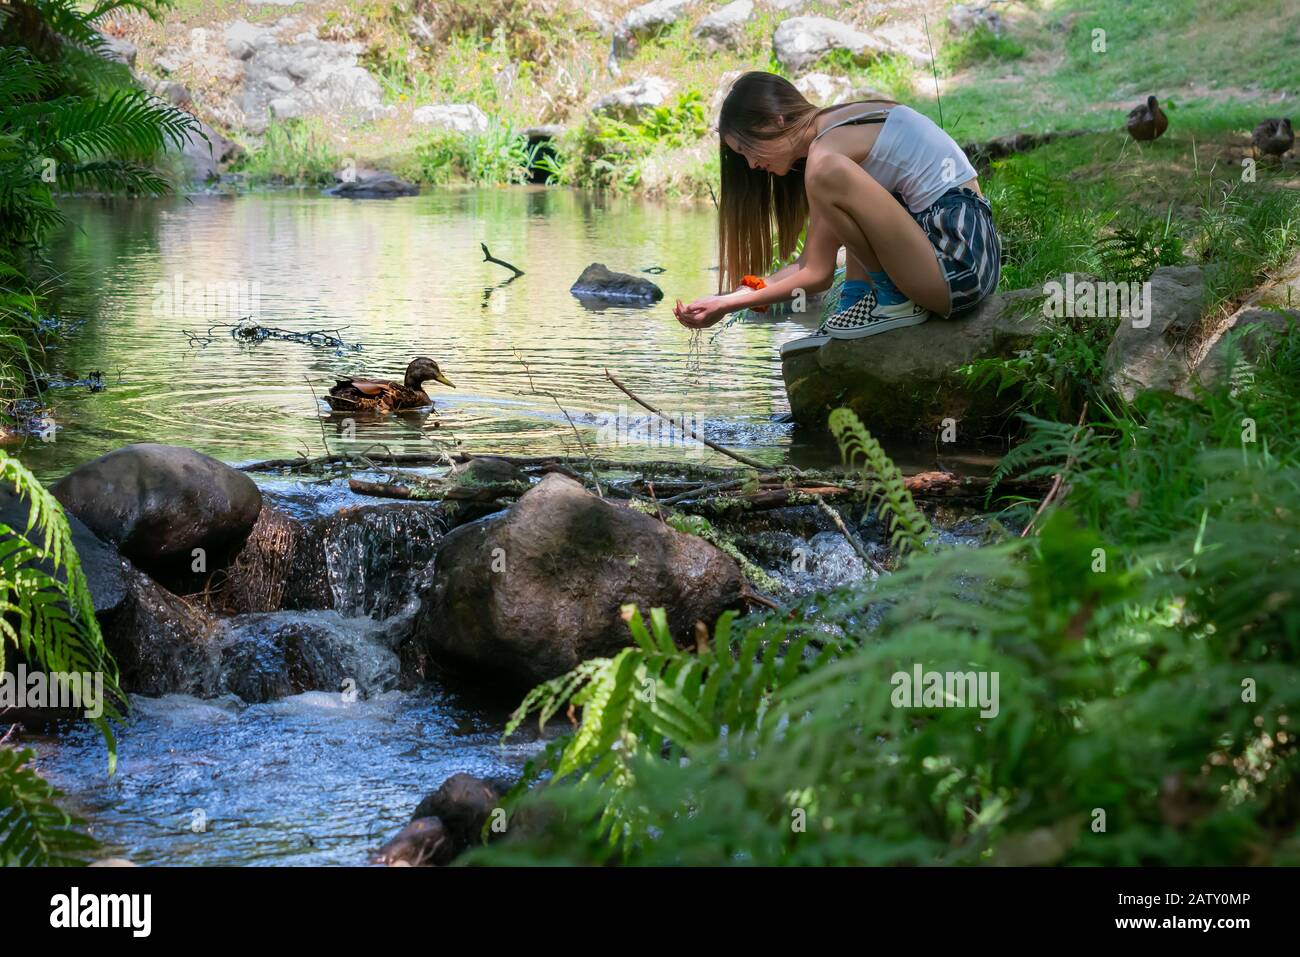 Young woman kneeling by shady stream catching water spilling from her hands to drink in McLaren Falls Park, Tauranga New Zealand. Stock Photo